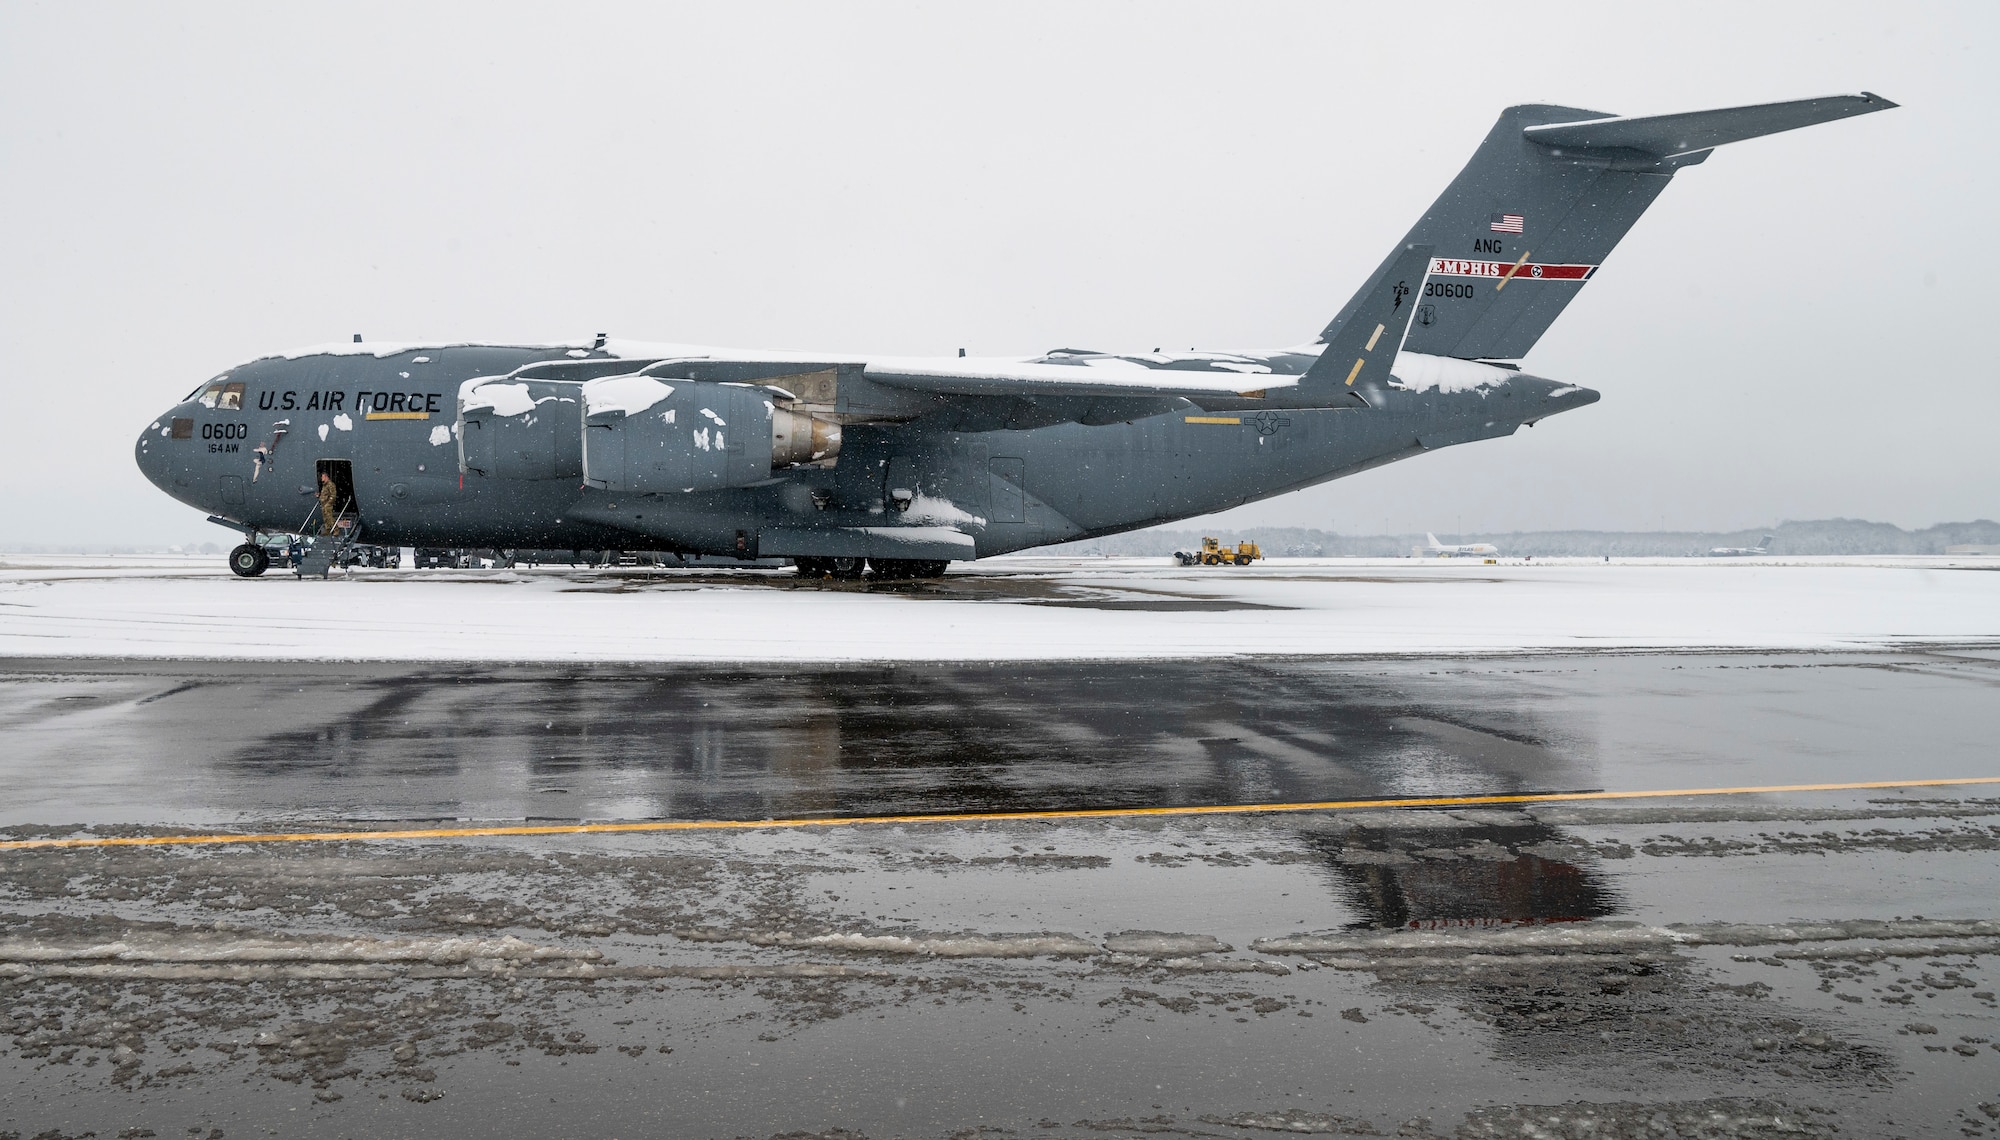 A snow-covered Tennessee Air National Guard C-17 Globemaster III sits on the flight line at Dover Air Force Base, Delaware, Feb. 11, 2021. As snow fell, the base continued normal operations and prepared for additional winter weather. (U.S. Air Force photo by Senior Airman Christopher Quail)